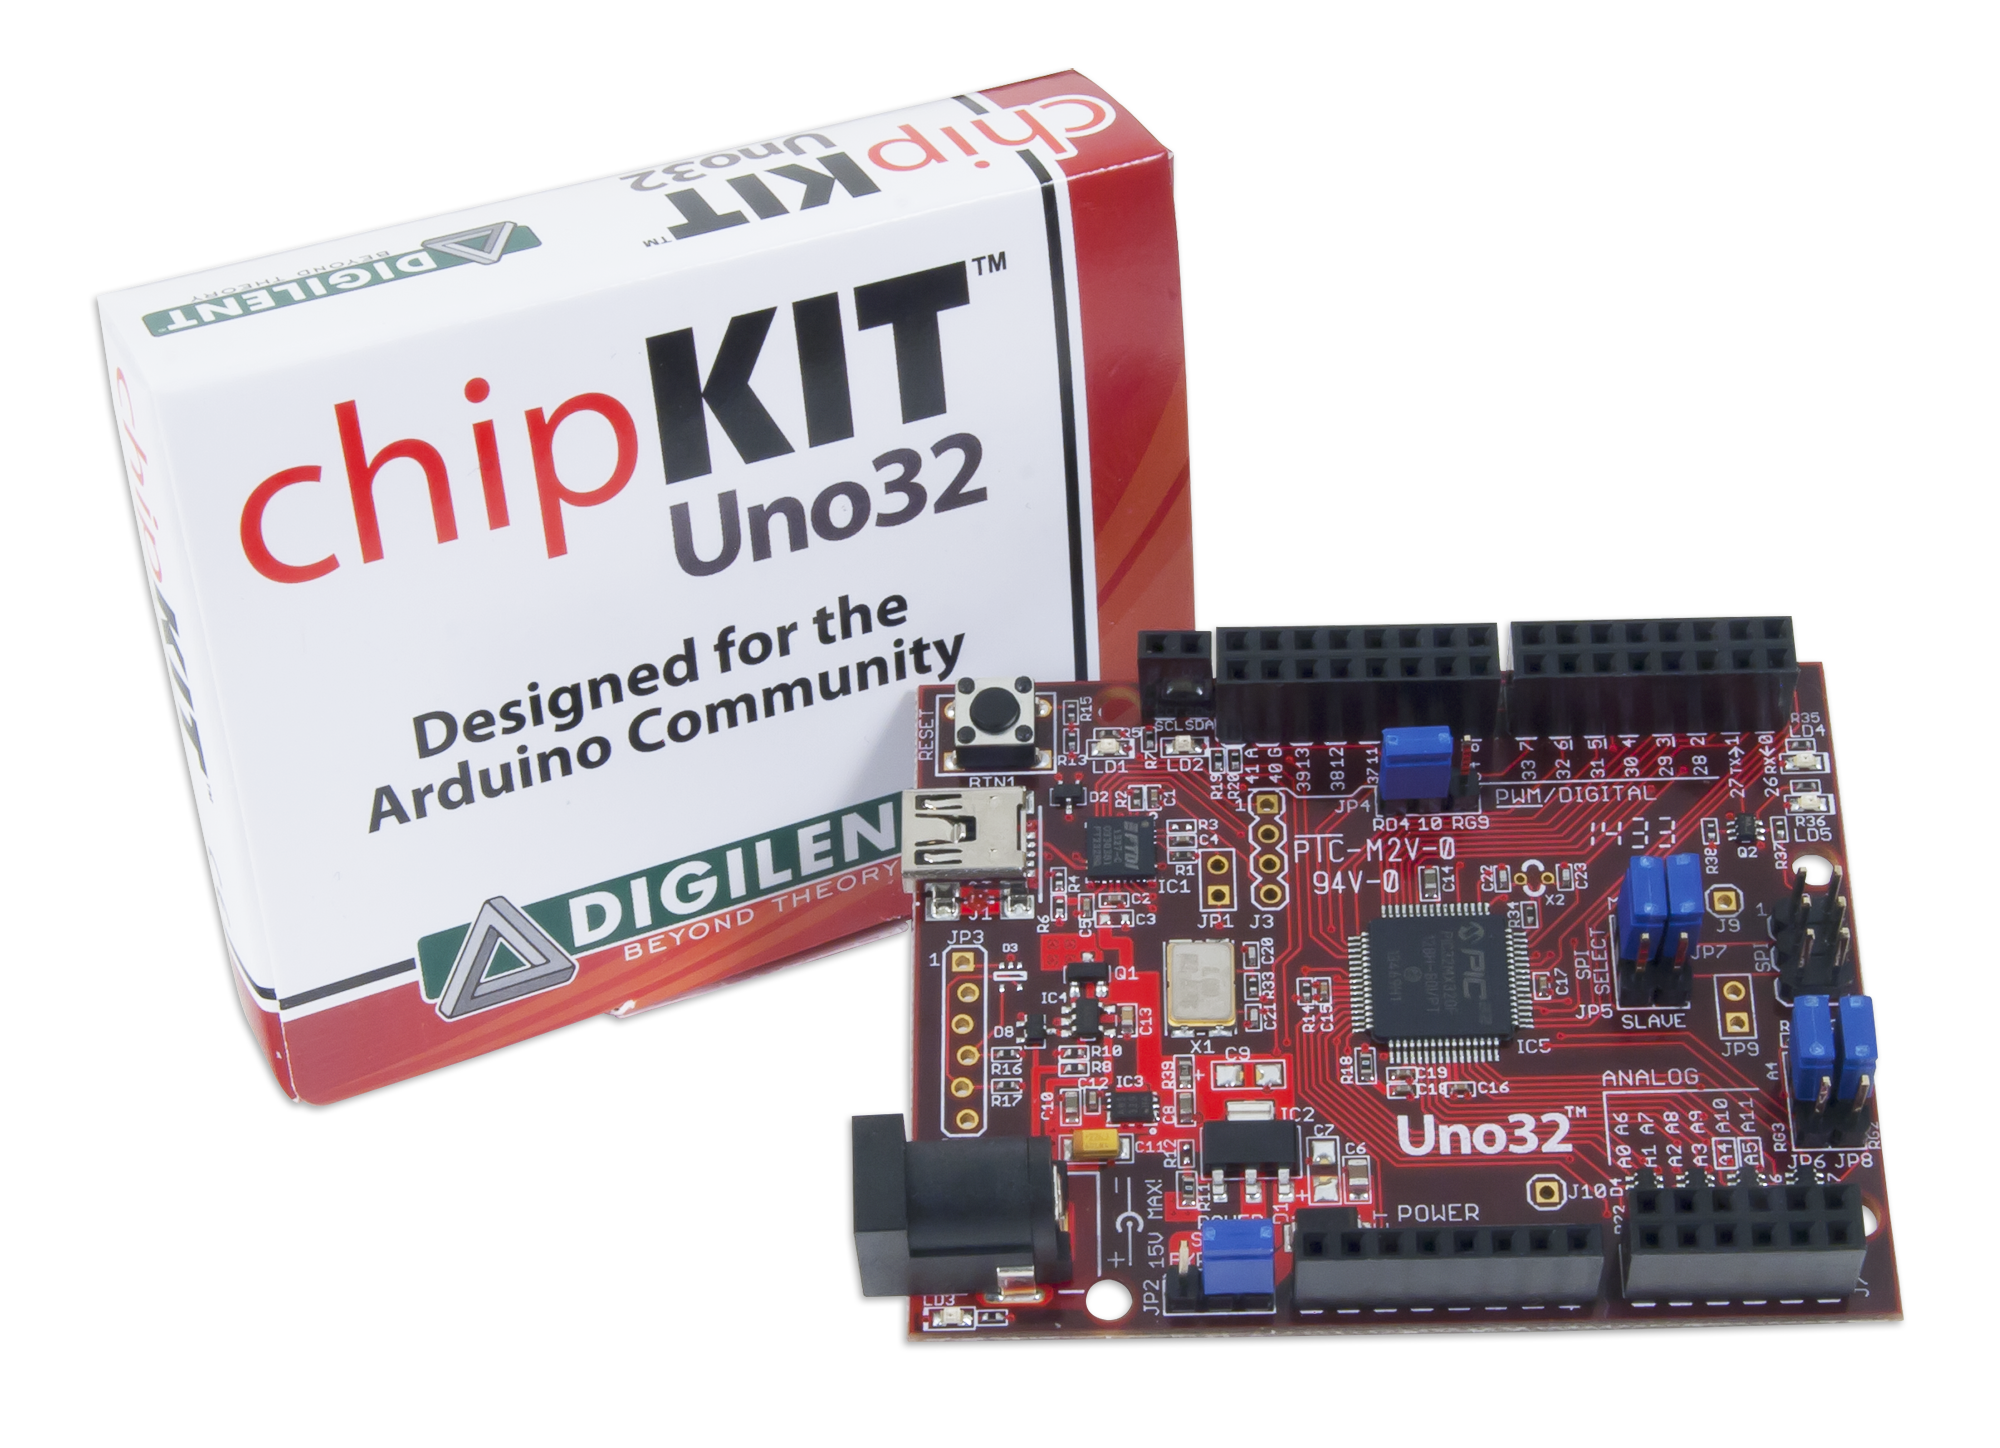 chipkit_uno32-box-2000.png